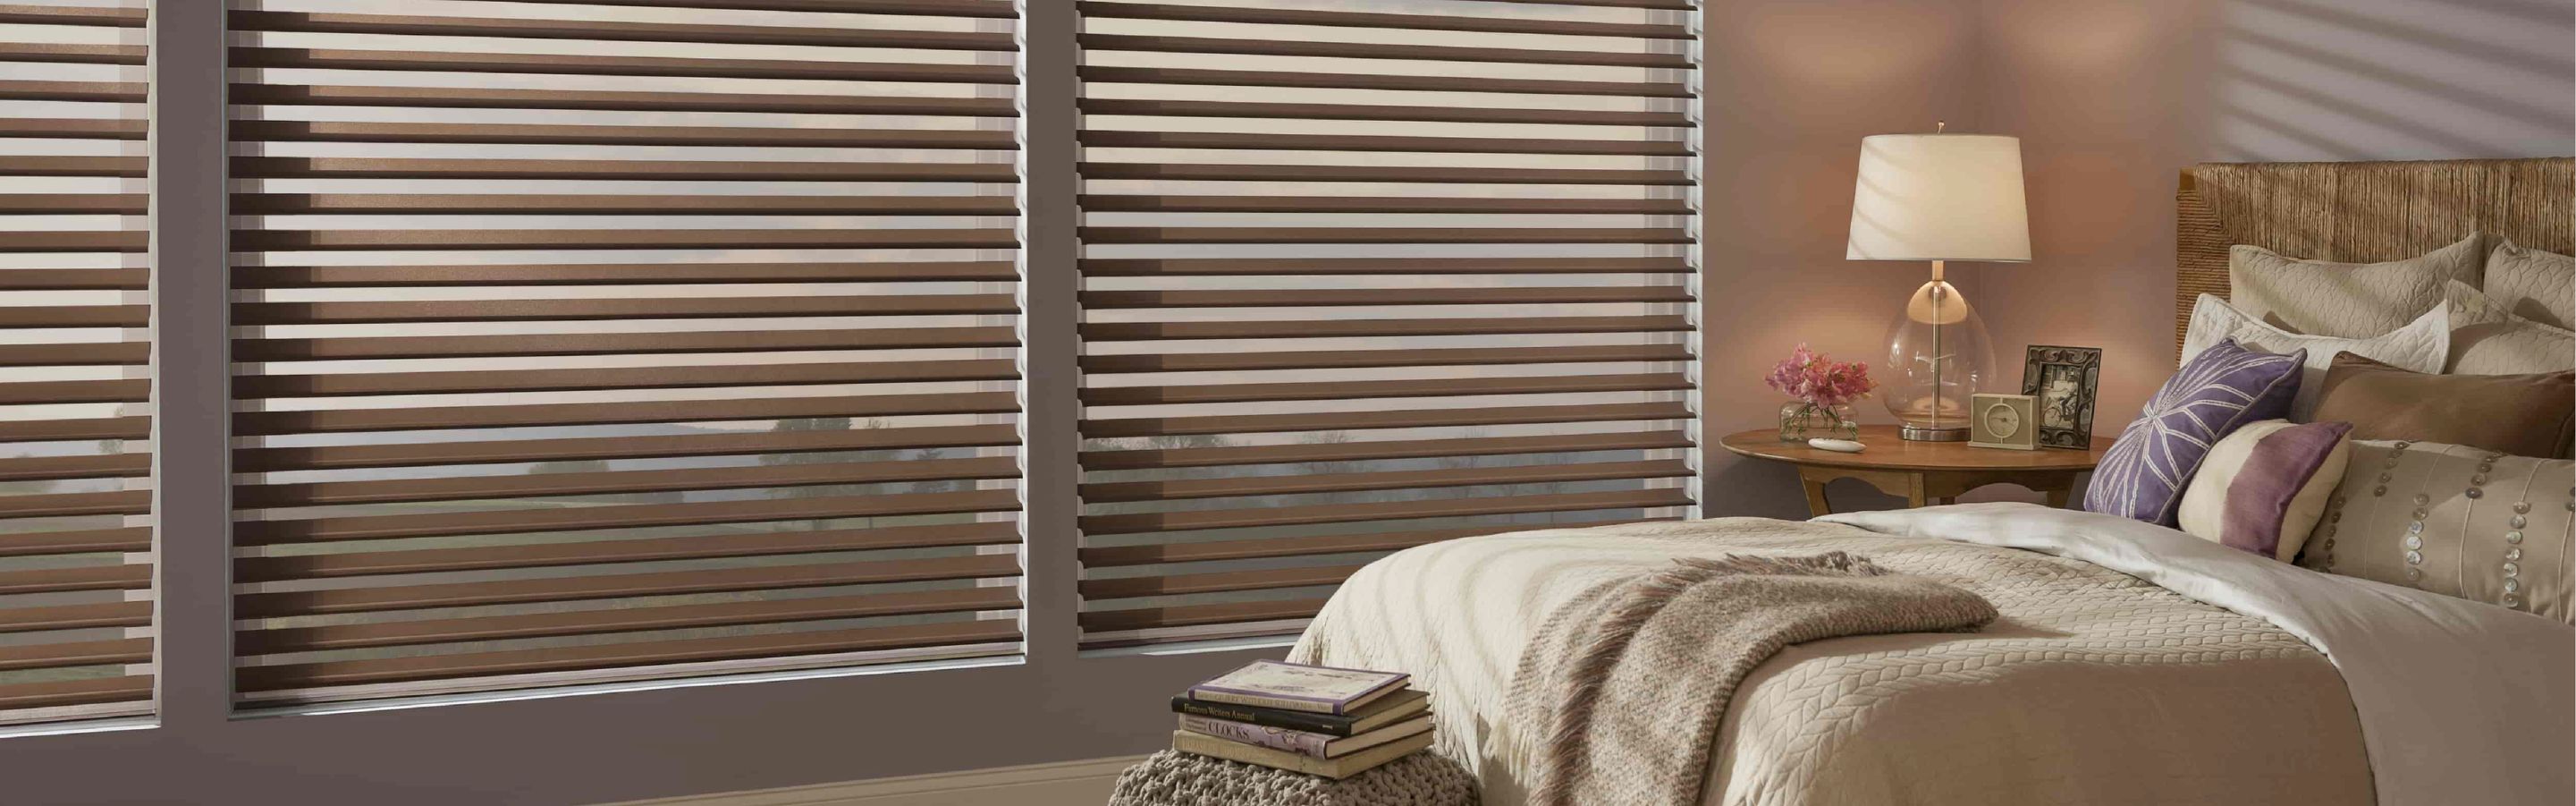 wood Shade-o-Matic  blinds in a serene bedroom